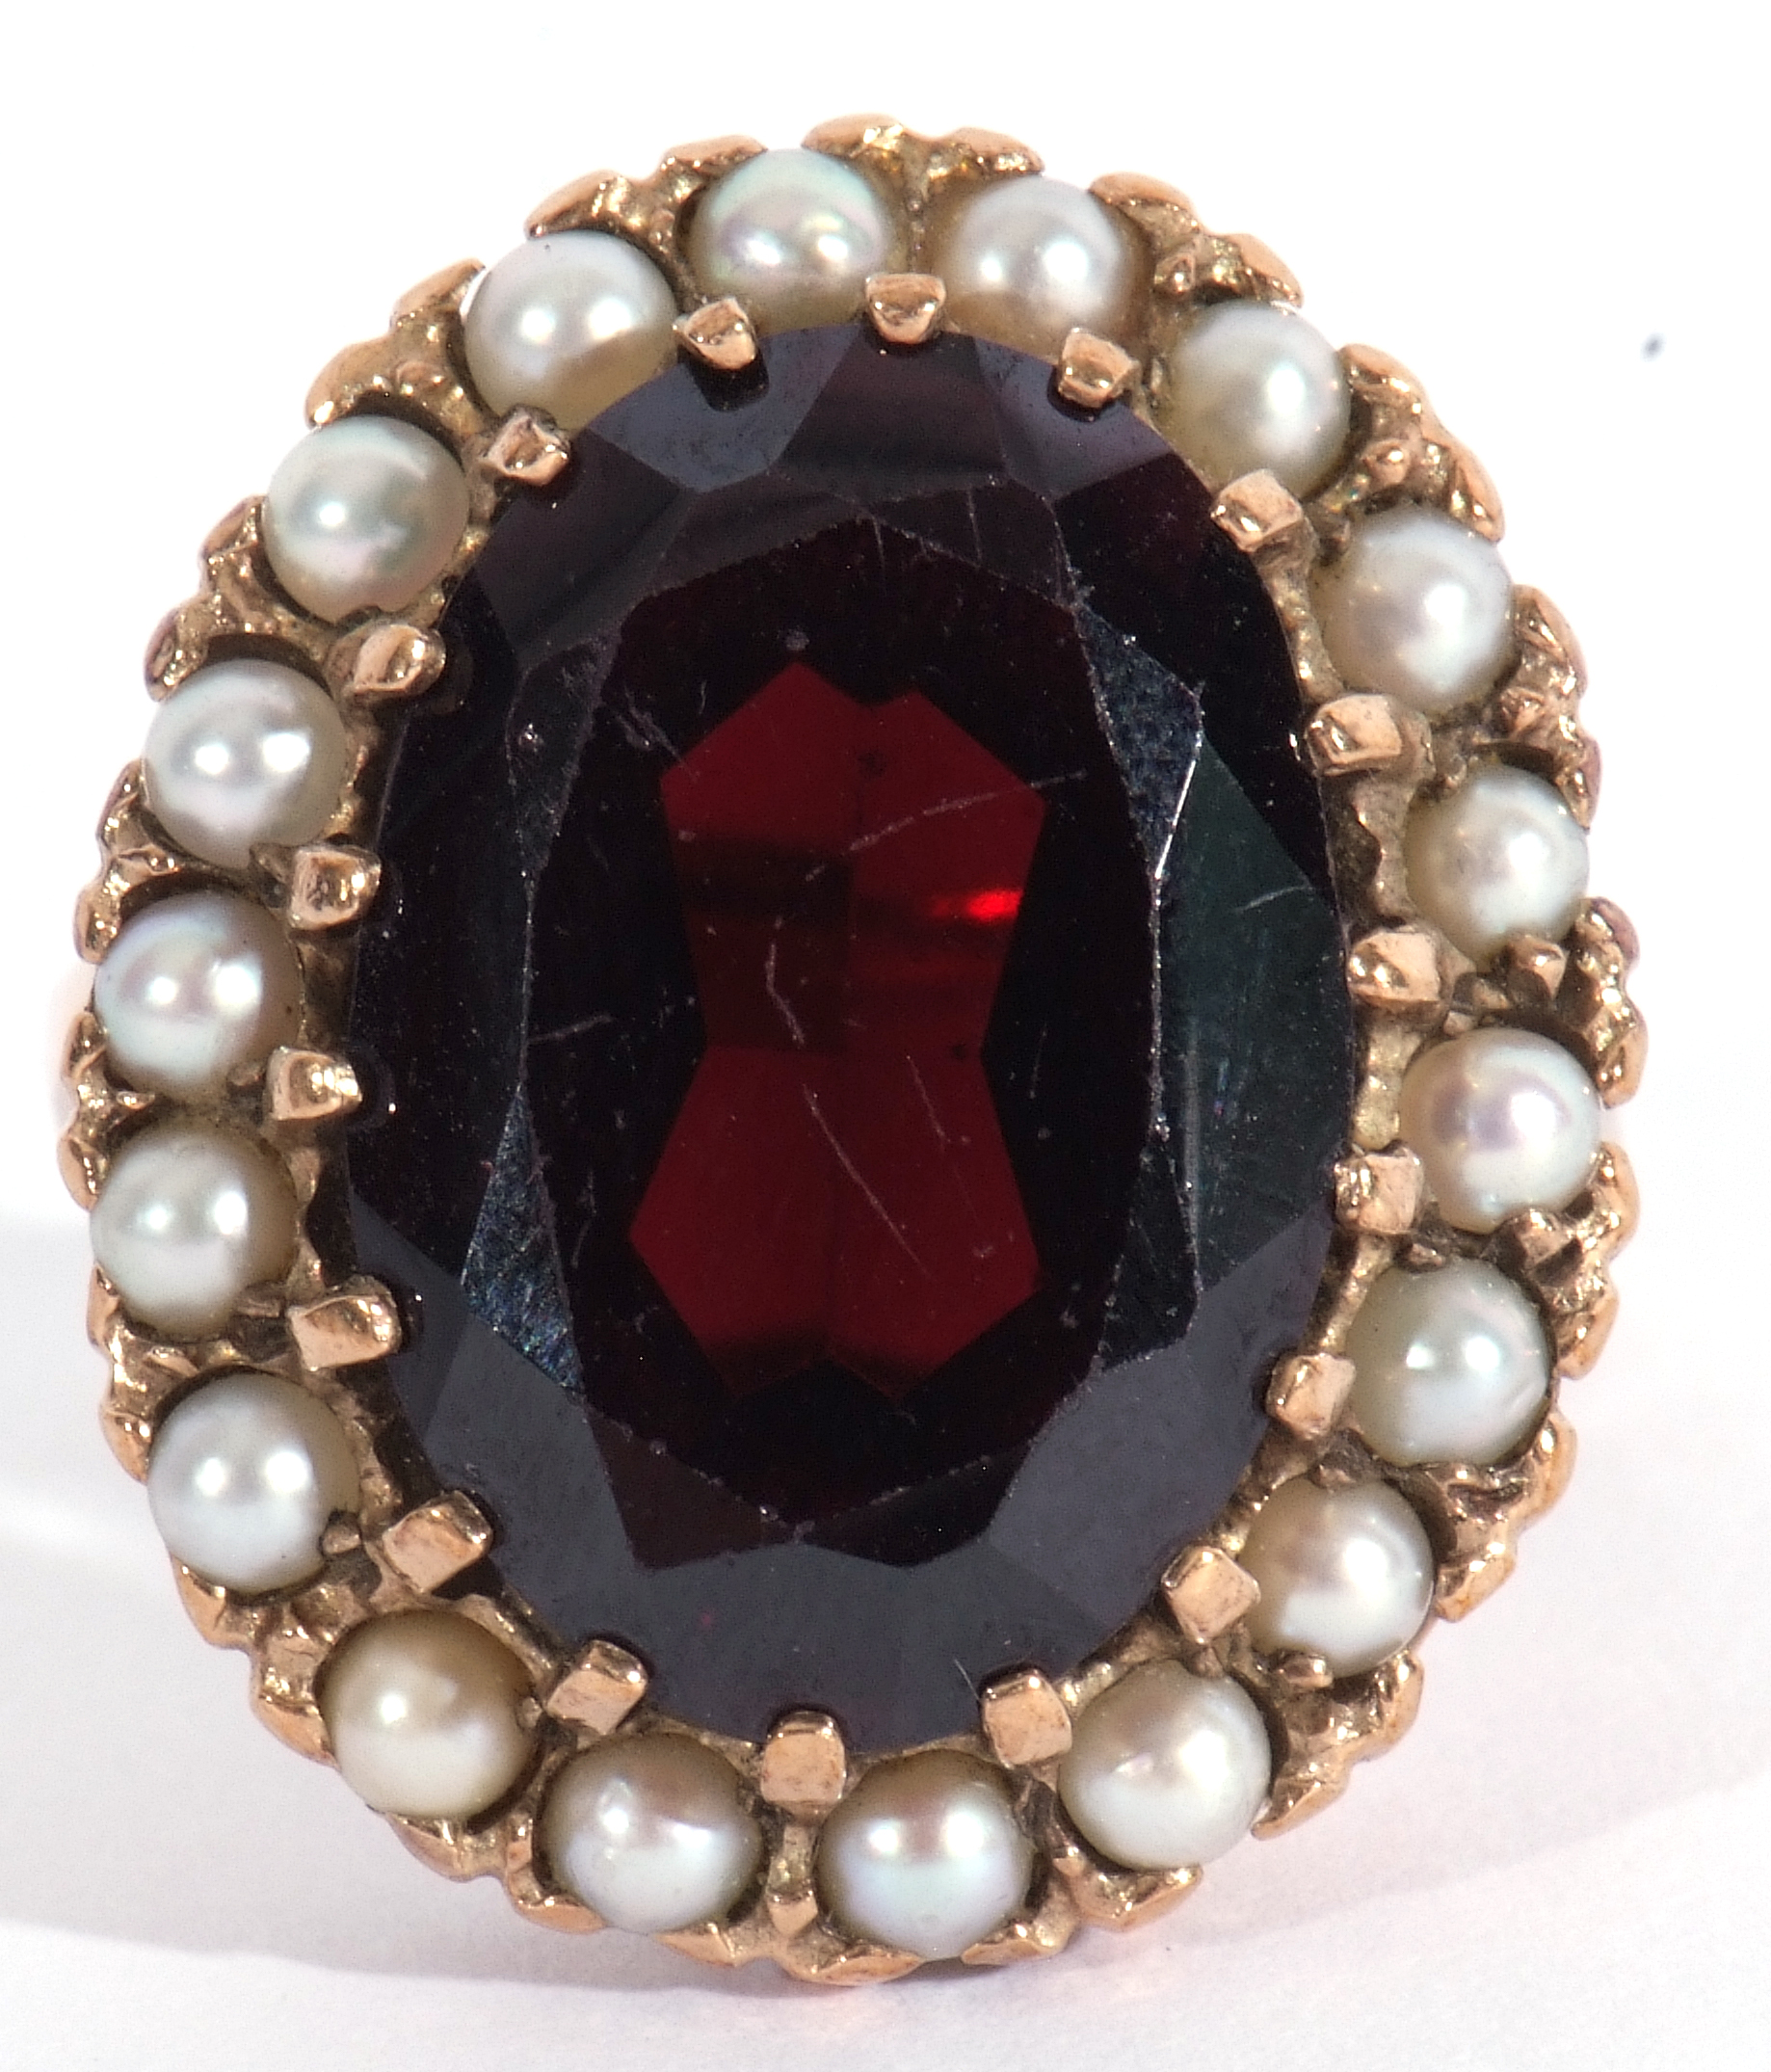 Modern 9ct gold dress ring, a large red paste faceted stone, 18 x 12mm, within a seed pearl - Image 2 of 9